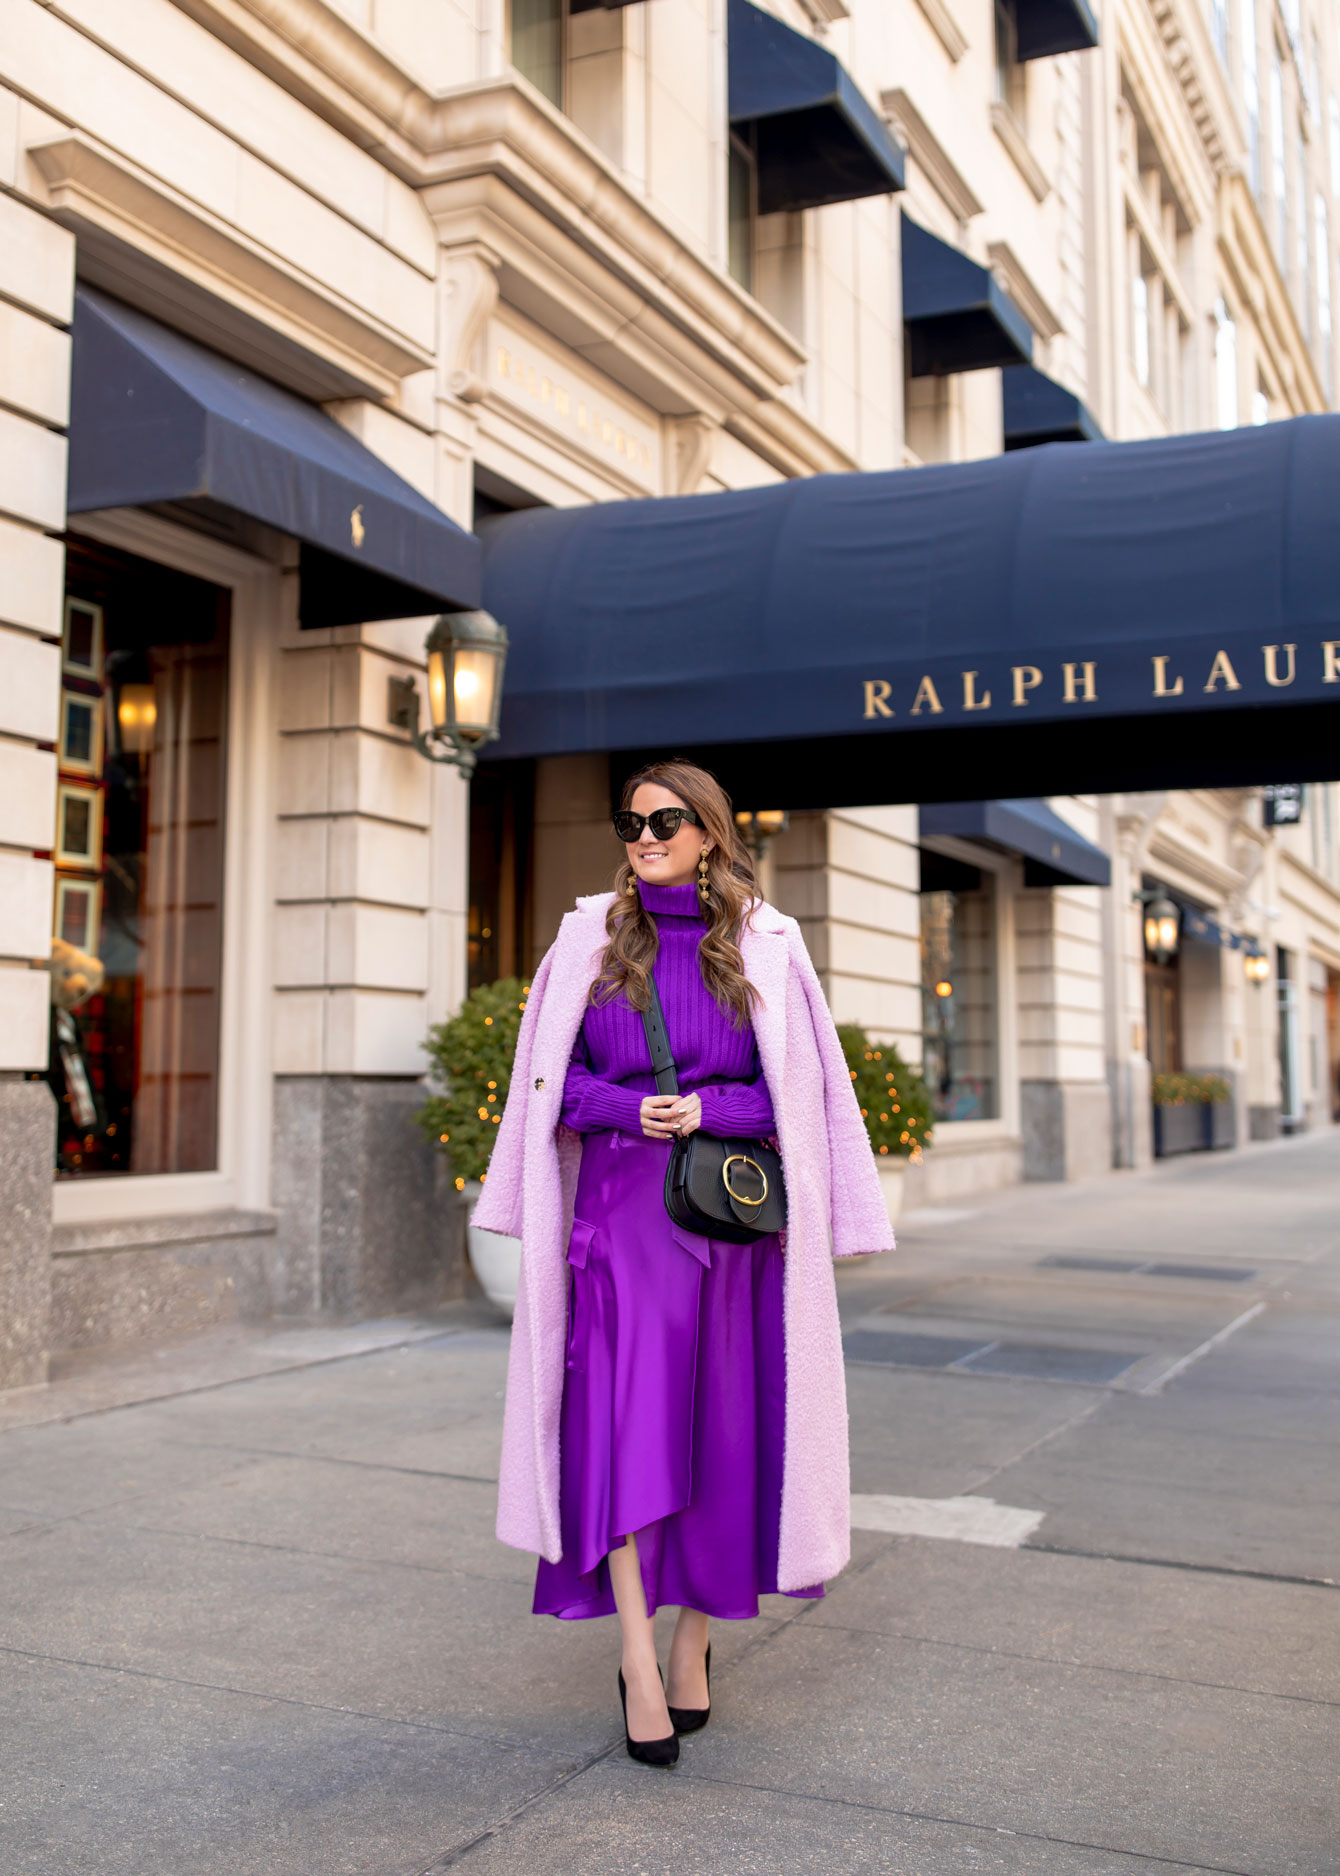 Ralph Lauren Chicago Shopping Event - Style Charade